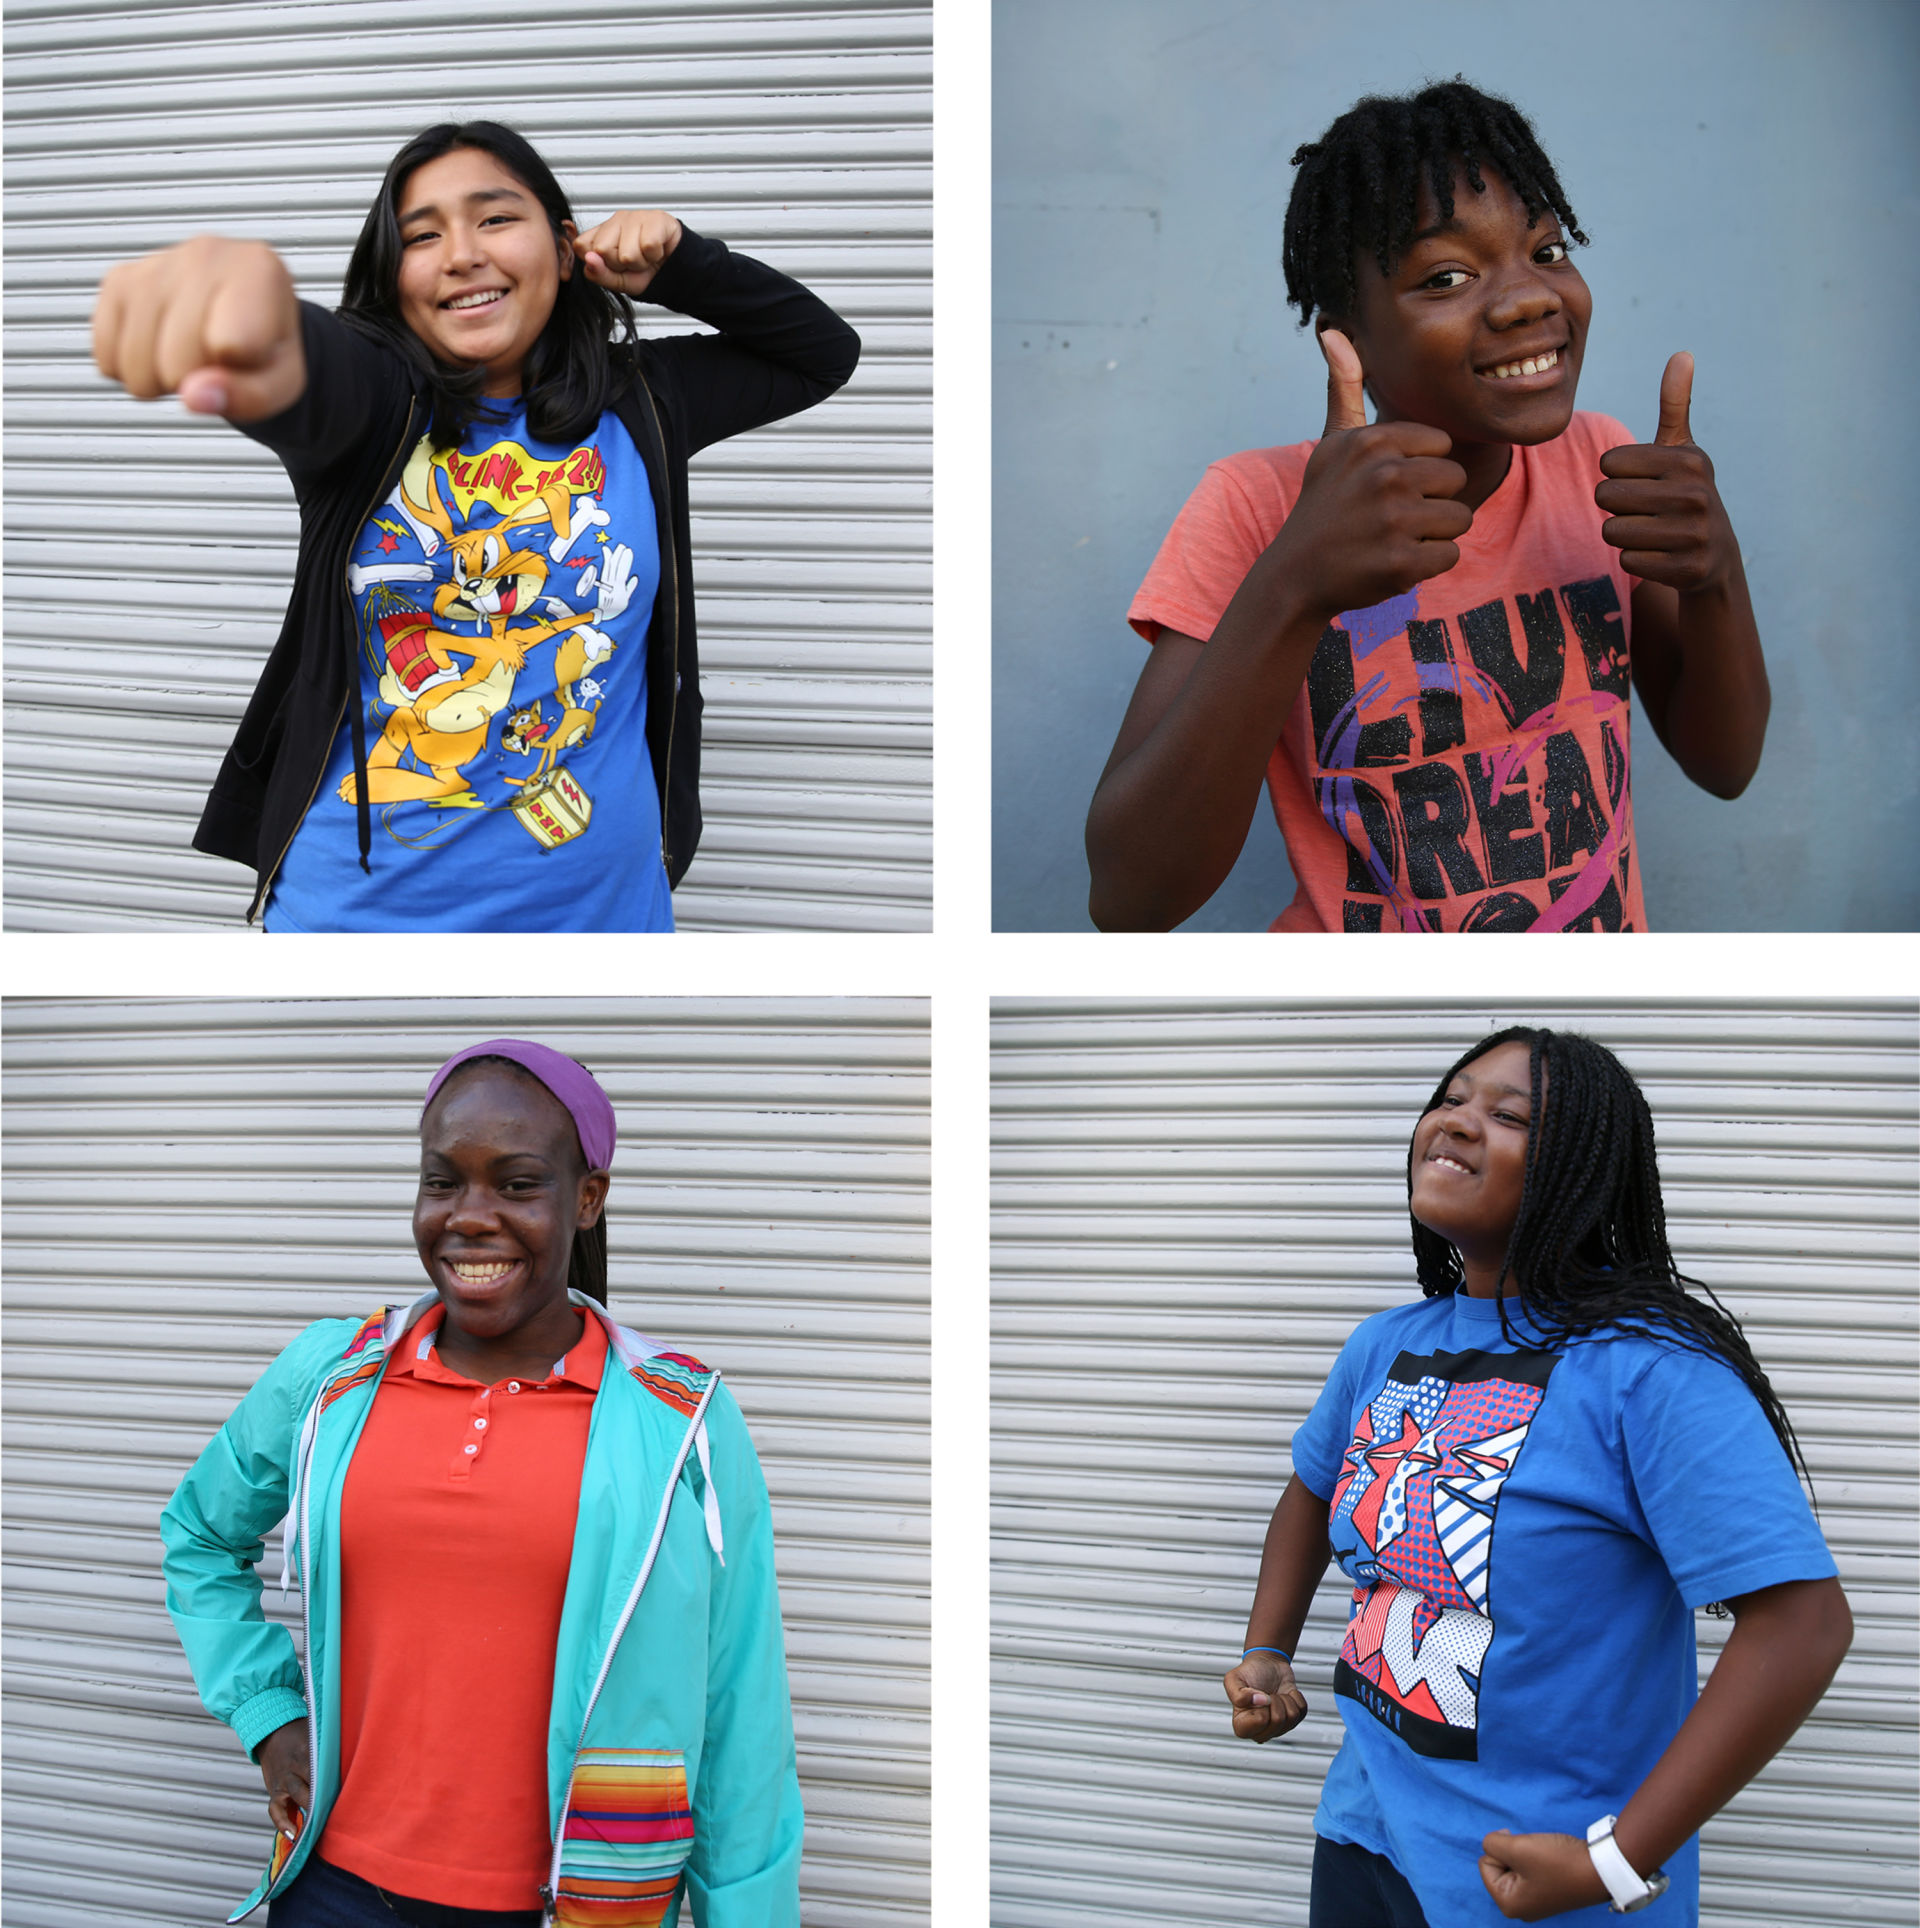 Clockwise from top left: Sophia Neciosup, 13, Natalia Cox, 13, Alexis Brooks, 13, and Tehya Ford, 16, all participated in a Black Girls CODE summer camp session in San Francisco.